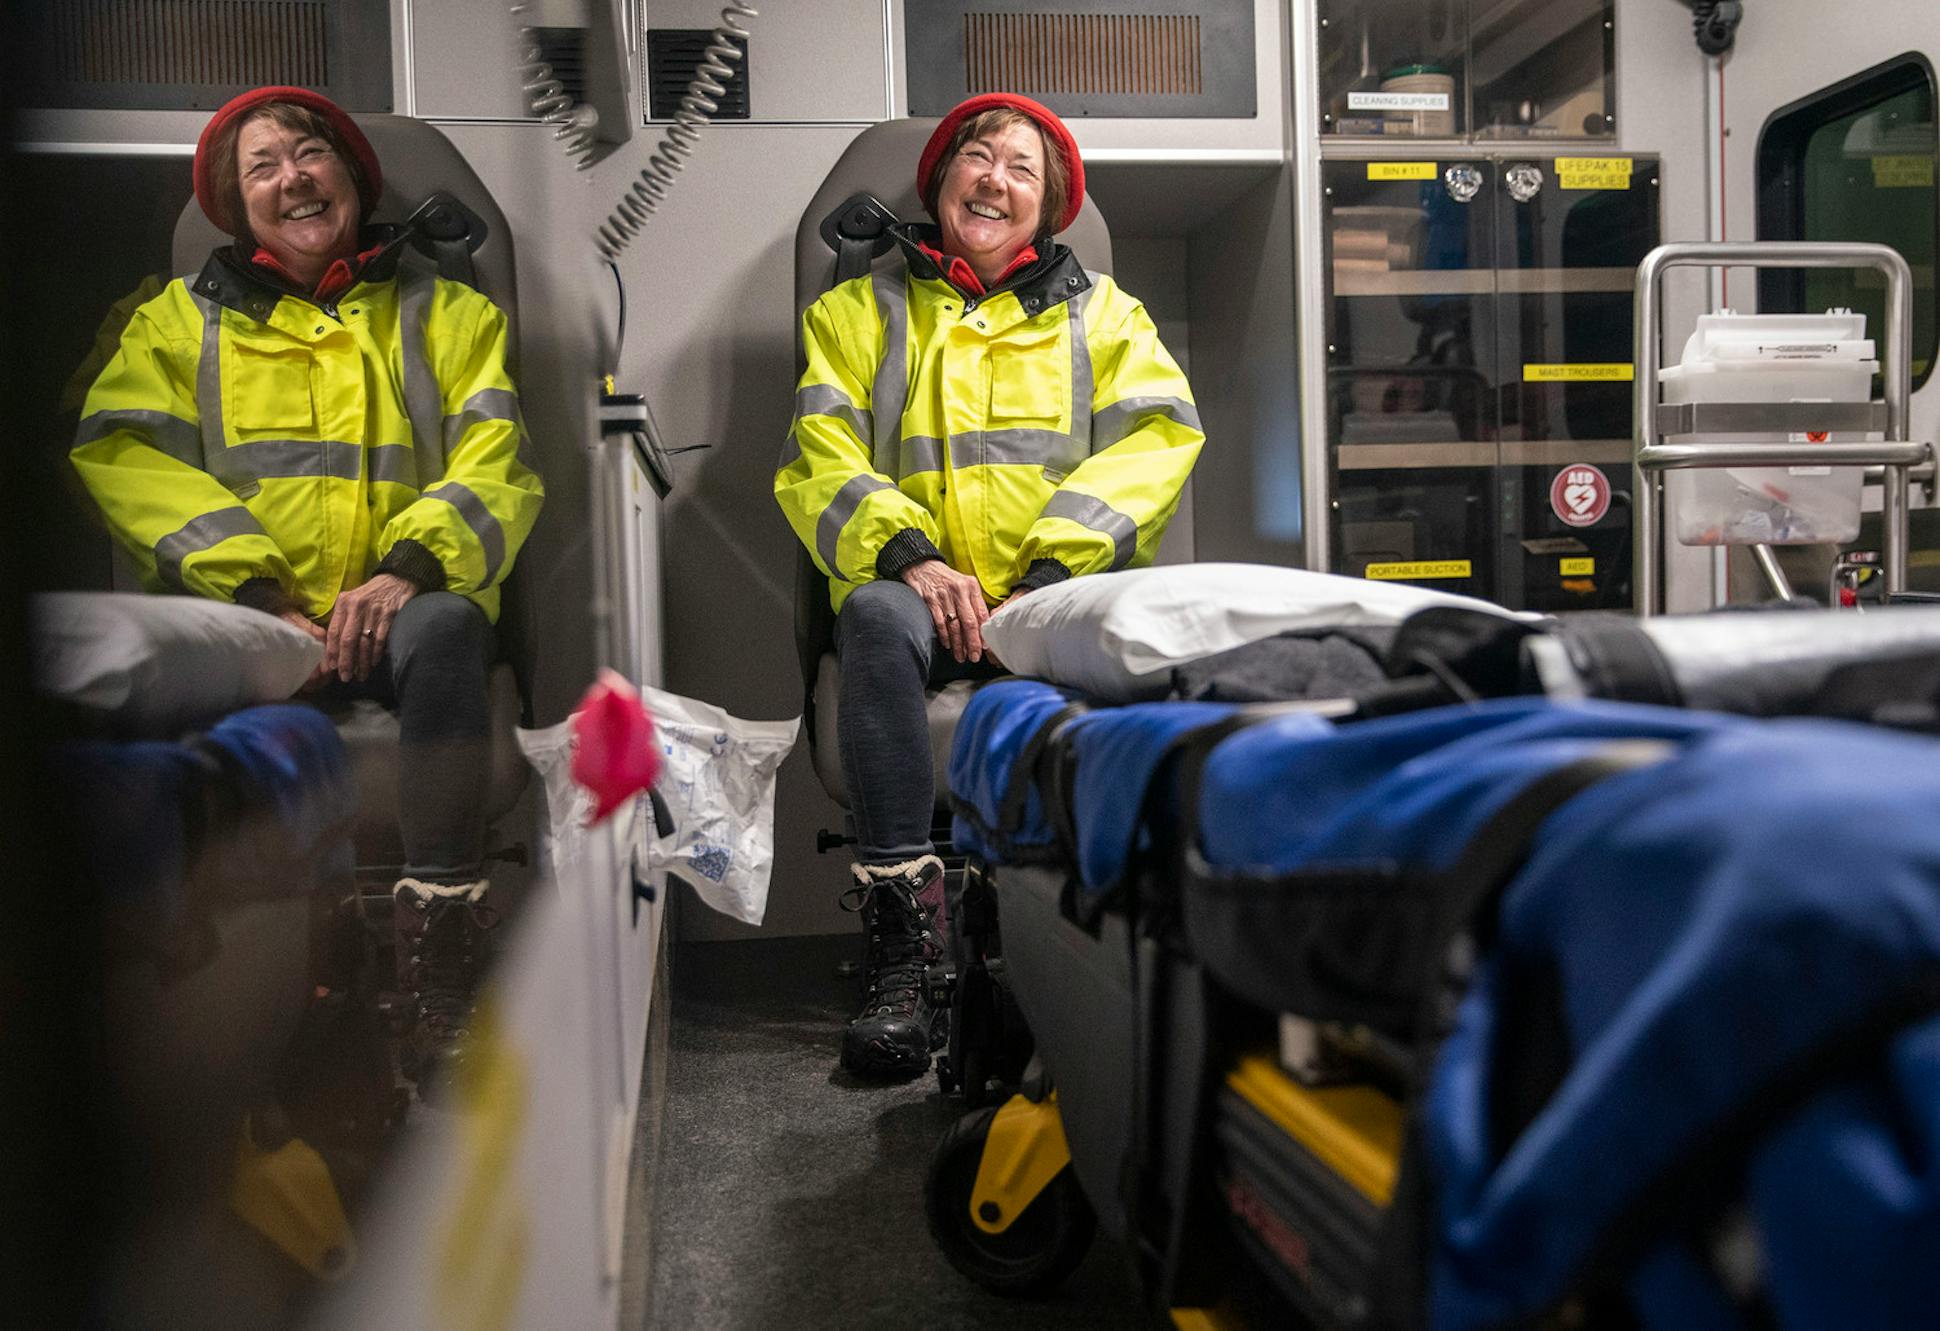 Laura Popkes became an EMT over time with the volunteer fire department. She and her husband, Daryl, started a new life on the Gunflint Trail in 1998.